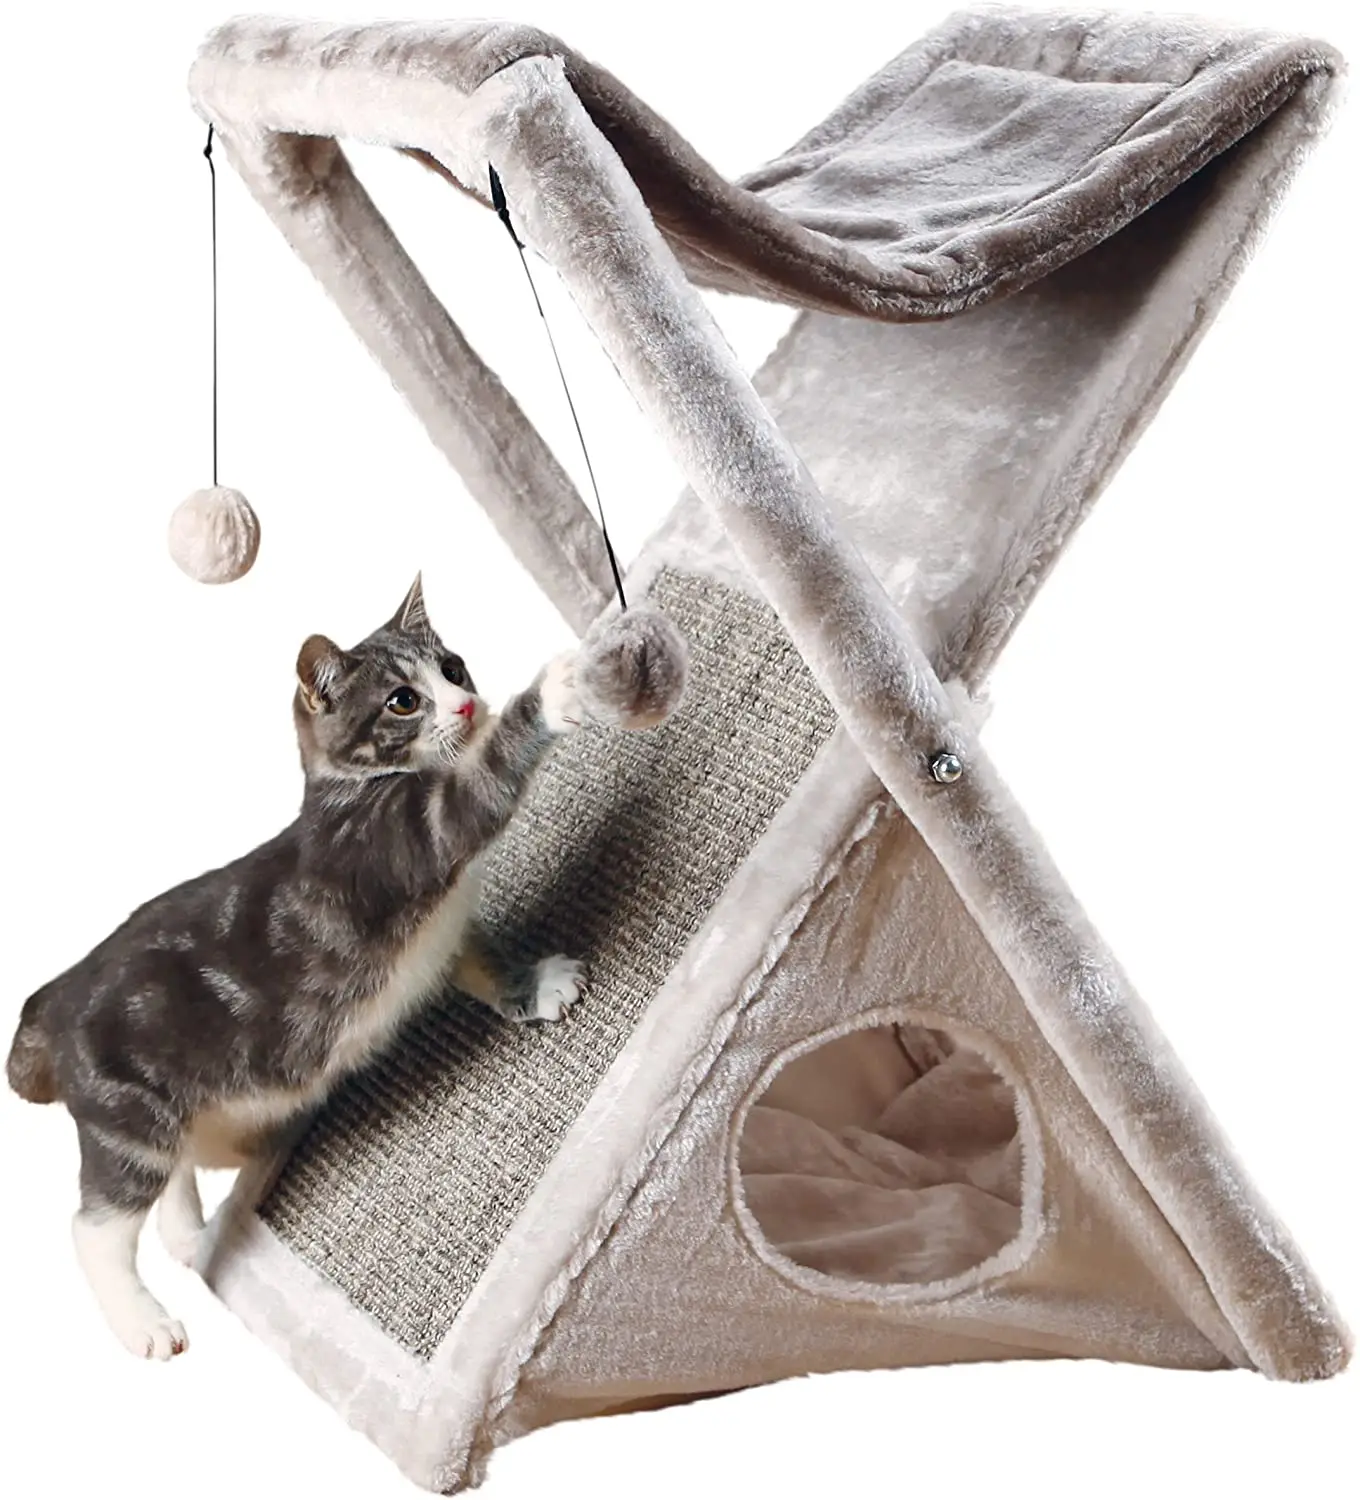 

Winter Warm Foldable Pet Bed Cat Tent Cage For Small Pet, Picture shows